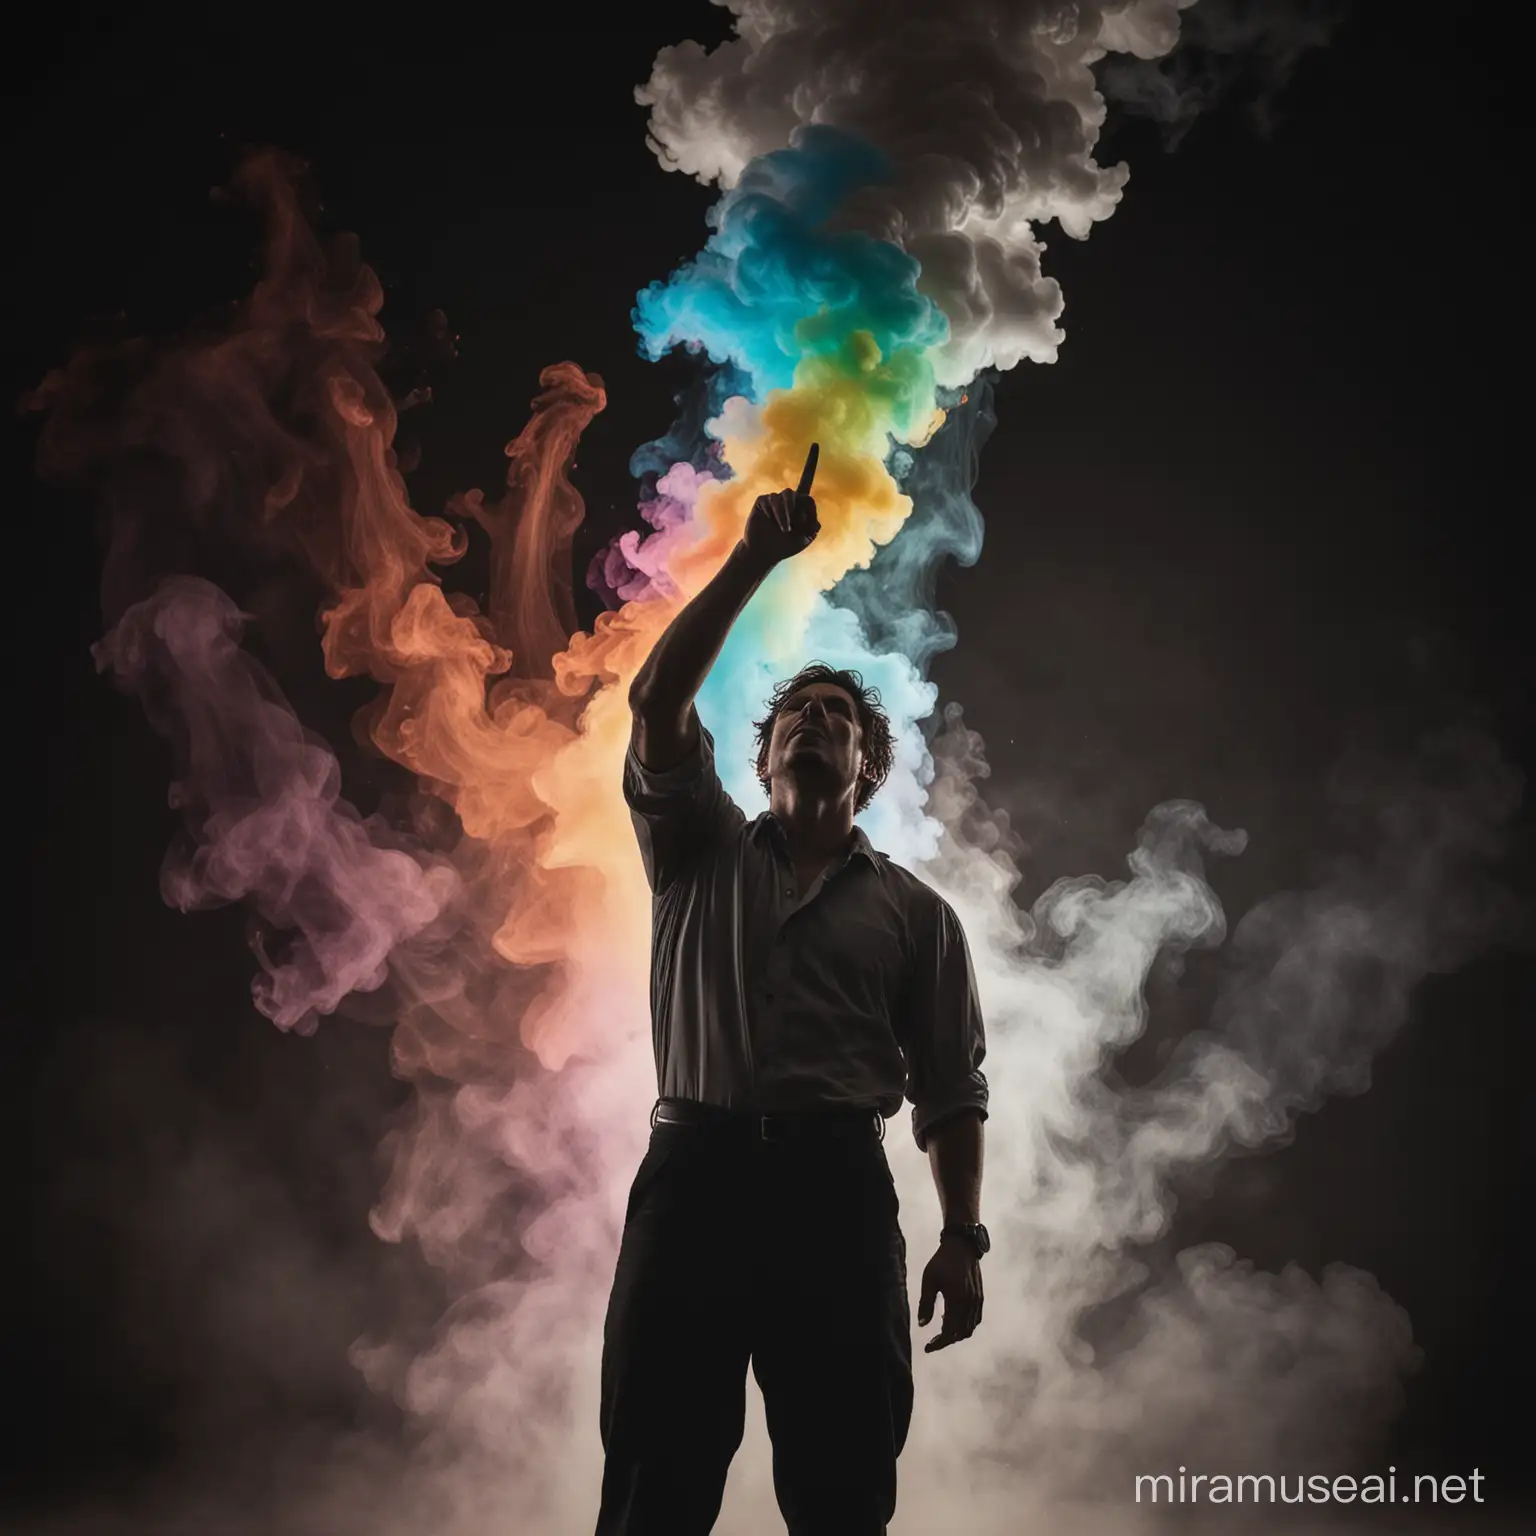 Frontal shot 30foot distance taken of a man looking up at the sky and straight arm raised with finger pointing toward. There is a pitch black background and a bit of colorful smoke rising from the ground behind him; noir style, dark.